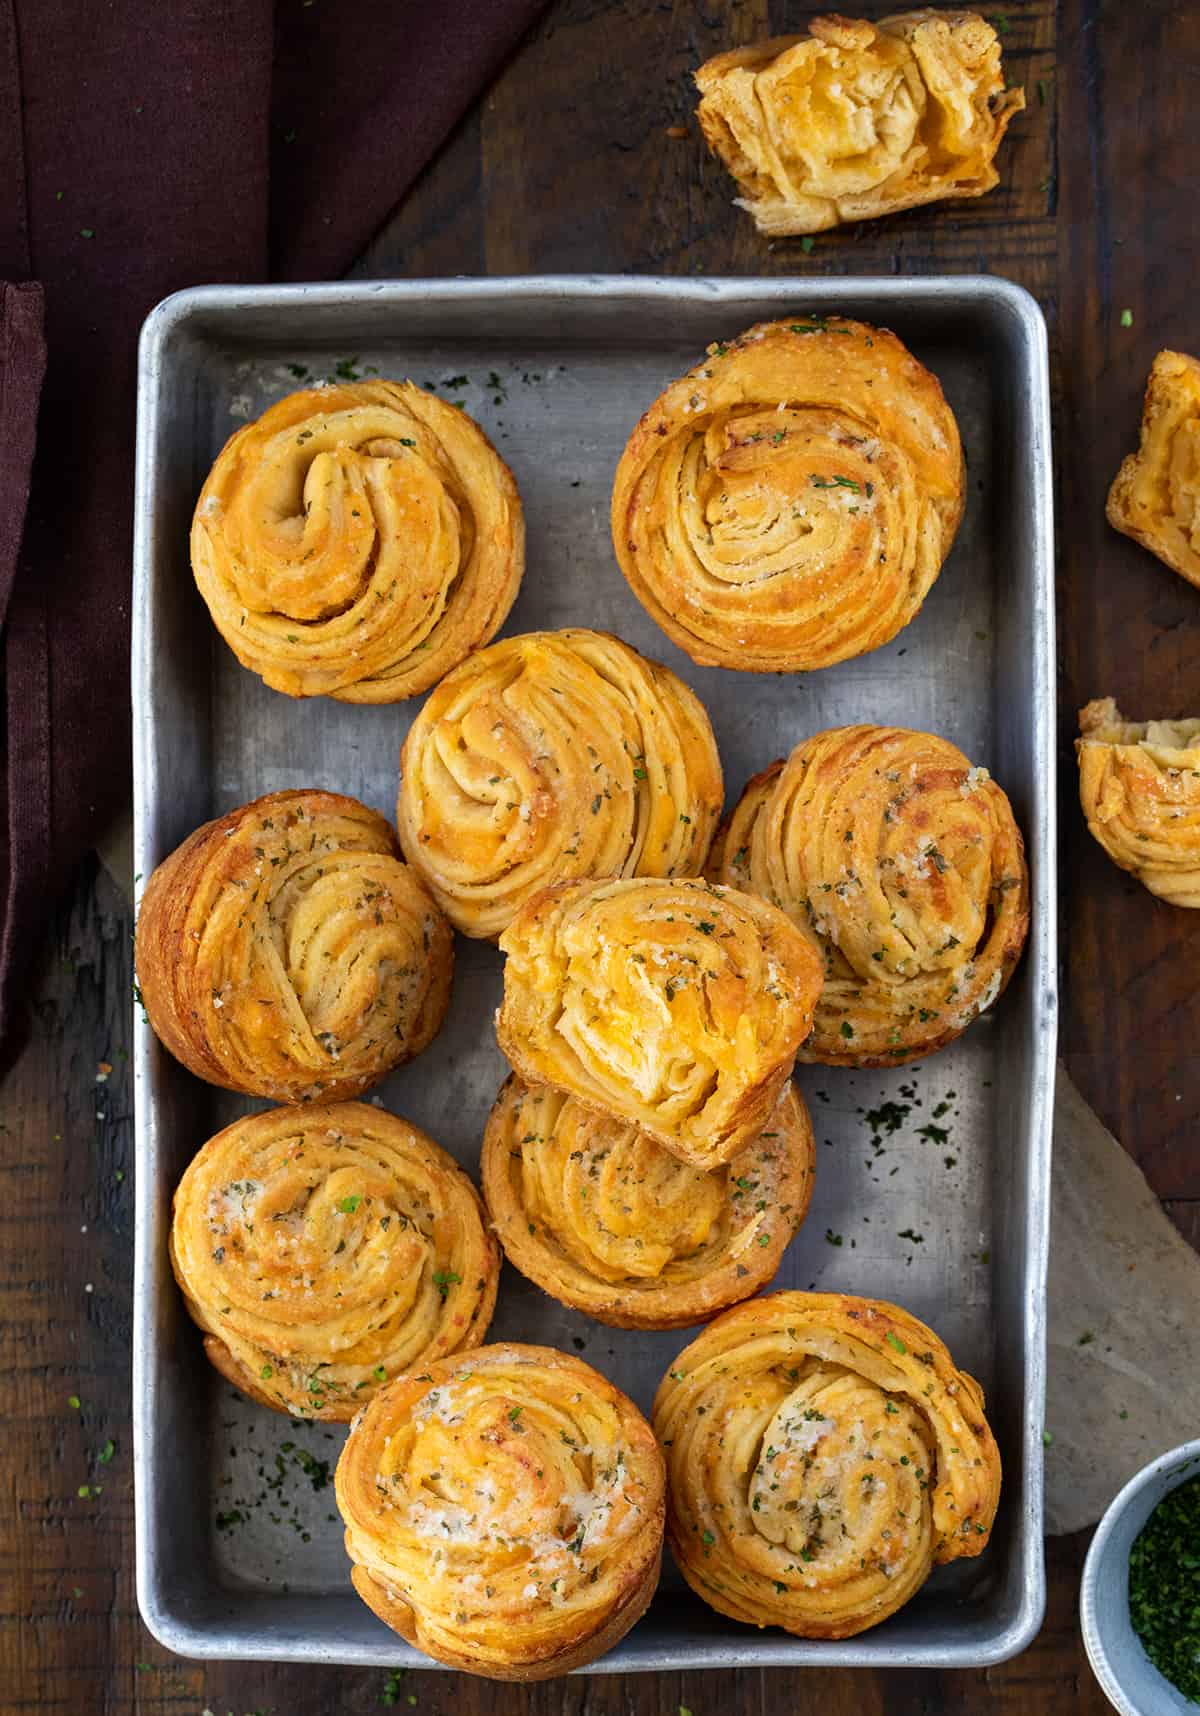 Pan of Easy Cheesy Cruffins with Some Cut in Half to Show Inside.